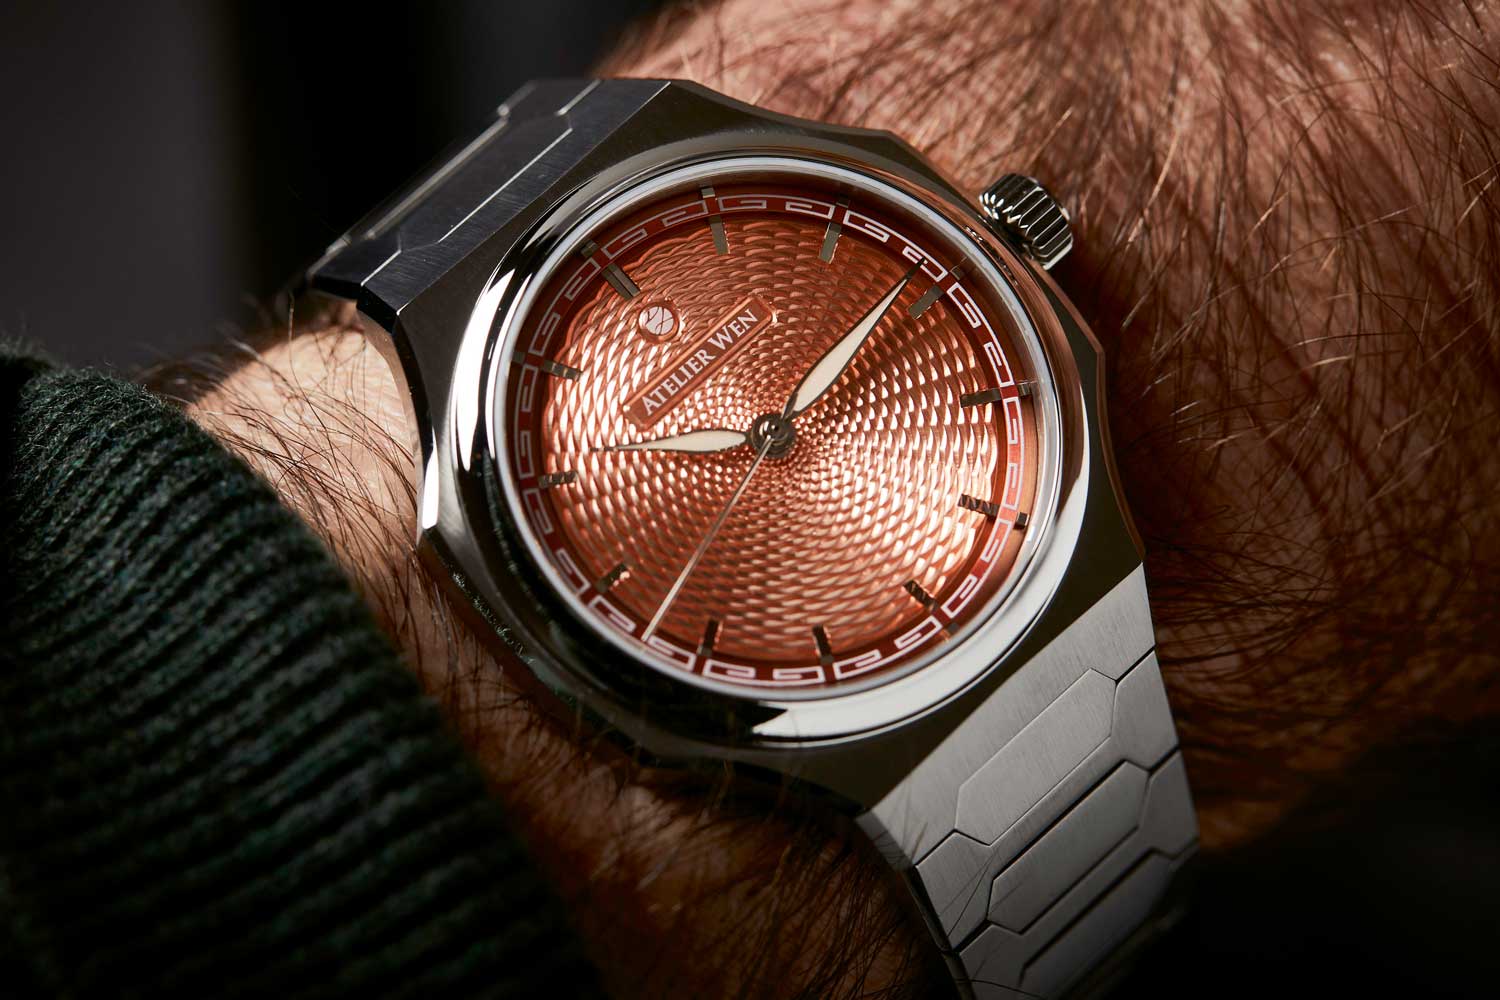 Atelier Wen Perception showcasing its guilloché dial, made from two layers and locked in place by the chapter ring